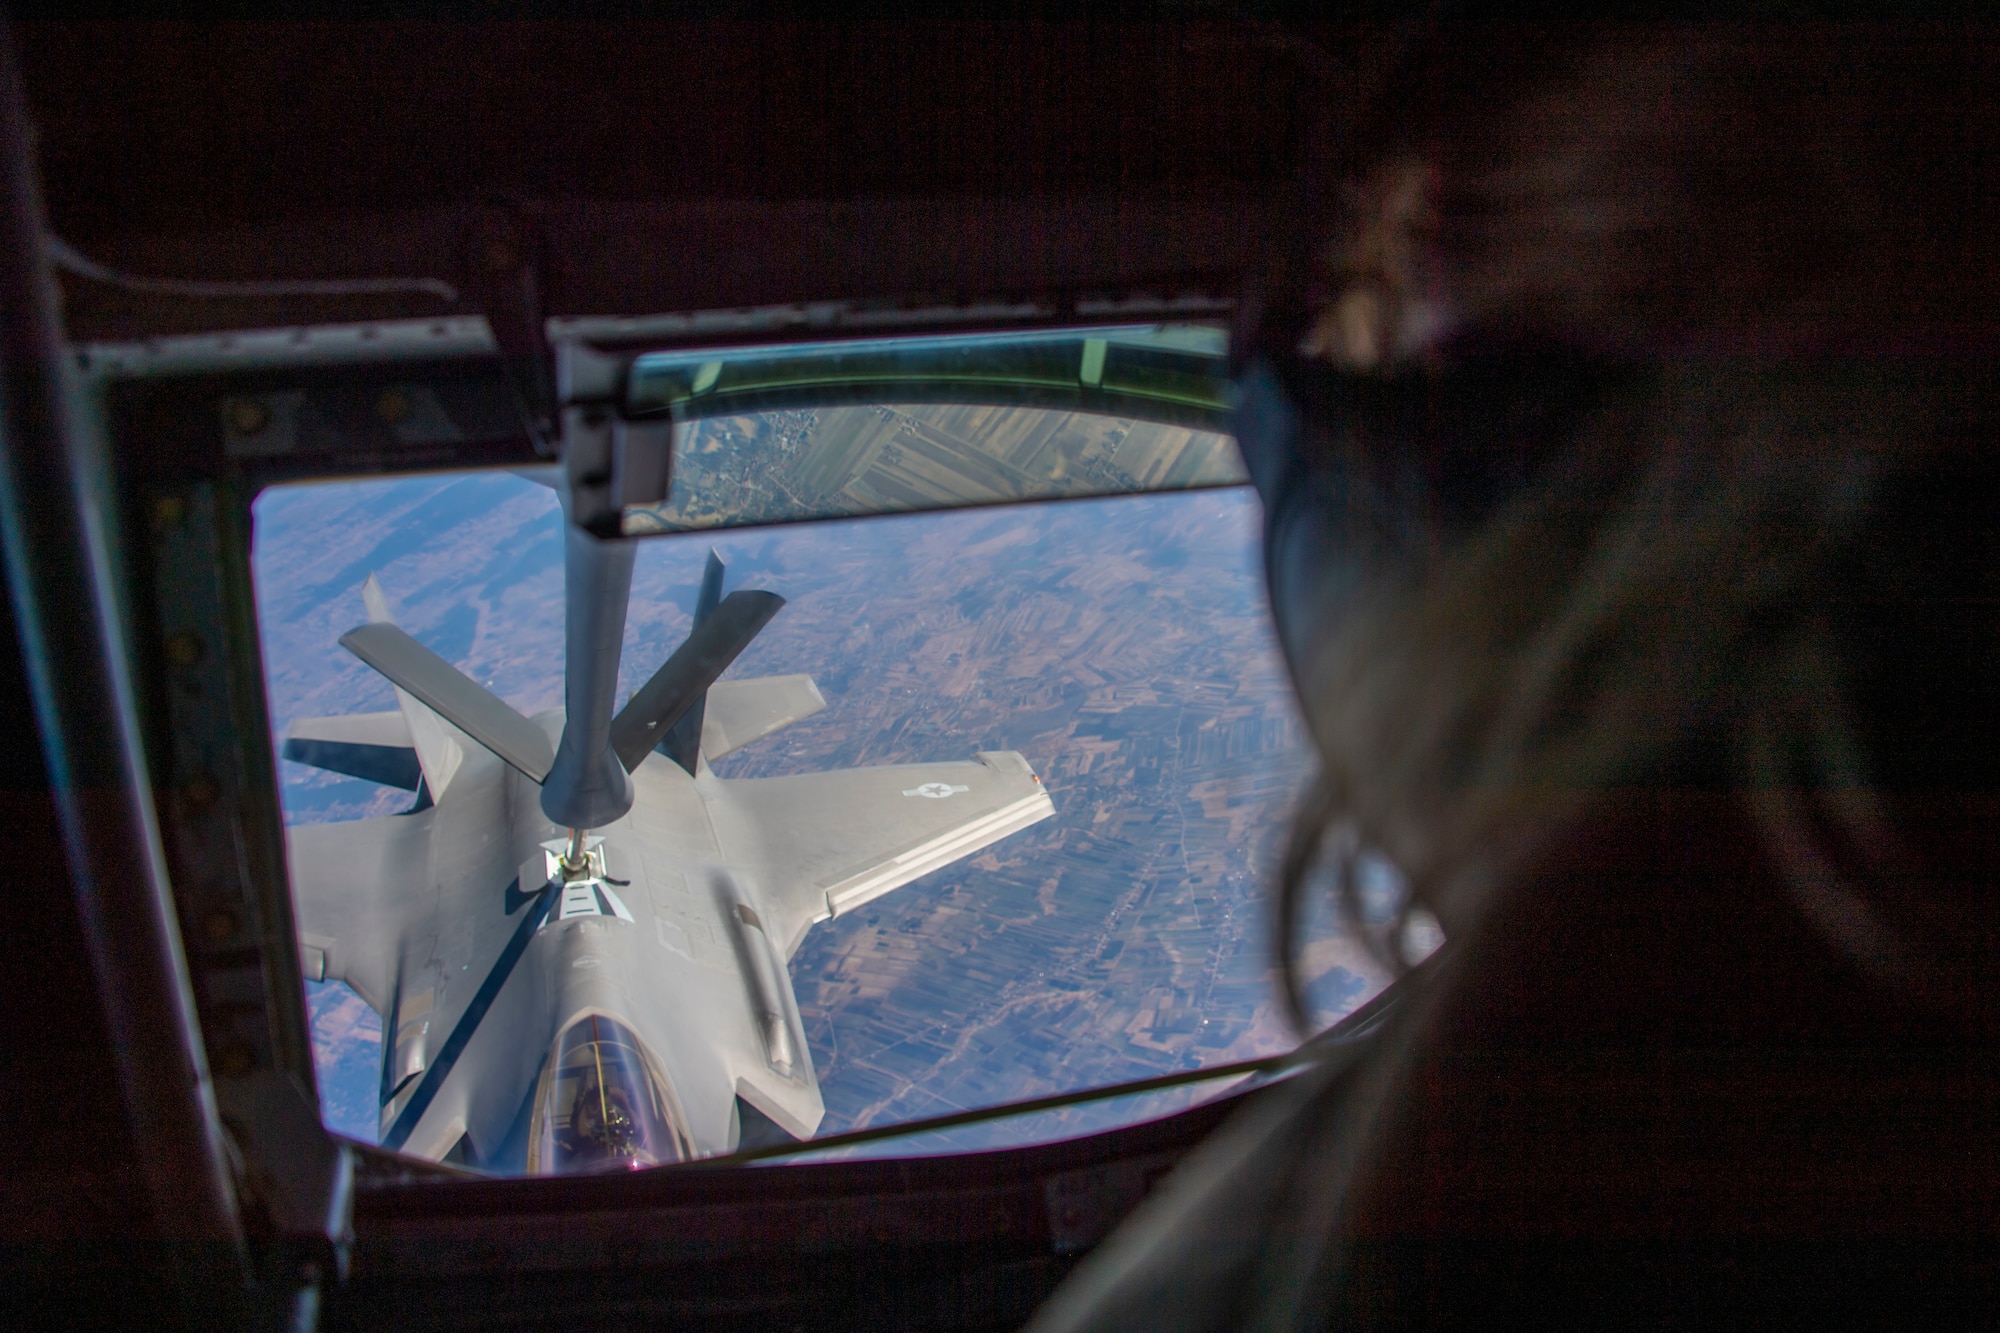 U.S. Air Force Senior Airman Constance Cassens, 92nd Air Refueling Squadron KC-135 boom operator assigned to Fairchild Air Force Base, Washington, refuels an F-35A Lighting II assigned to Hill Air Force Base, Utah, March 22, 2022. Airmen assigned to Fairchild AFB were deployed to bolster air refueling operations in support of NATO’s collective defense. (U.S. Air Force photo by Airman 1st Class Jessica Sanchez-Chen)